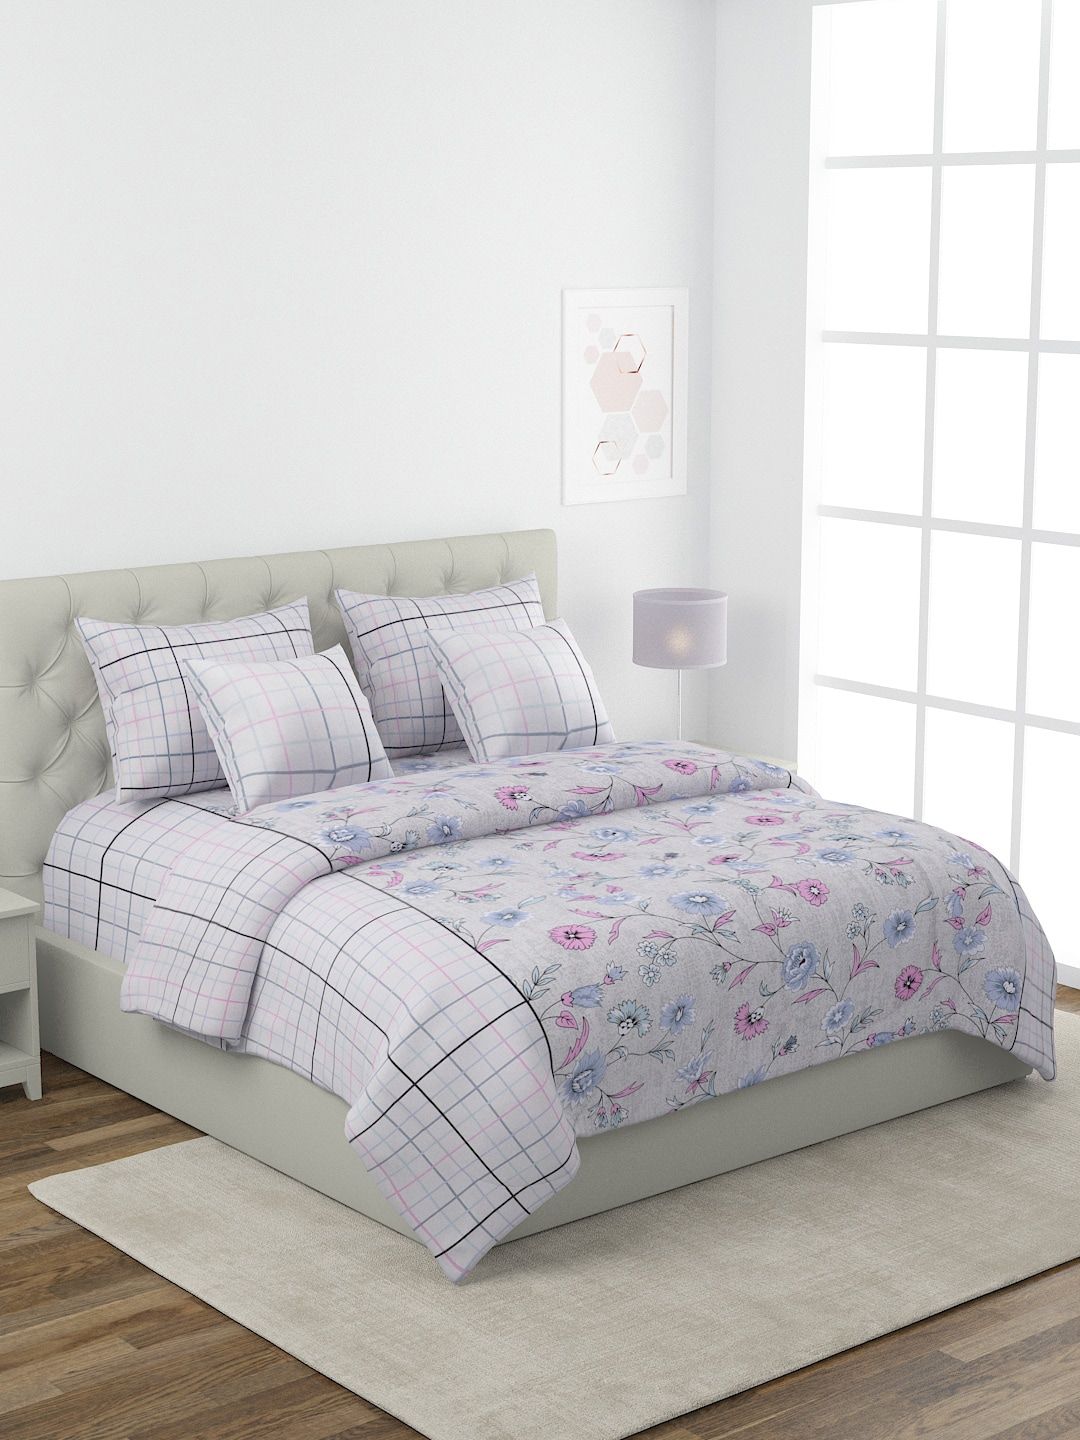 ROMEE White & Grey Melange Floral Printed & Checked Double King Bedding Set with Comforter Price in India